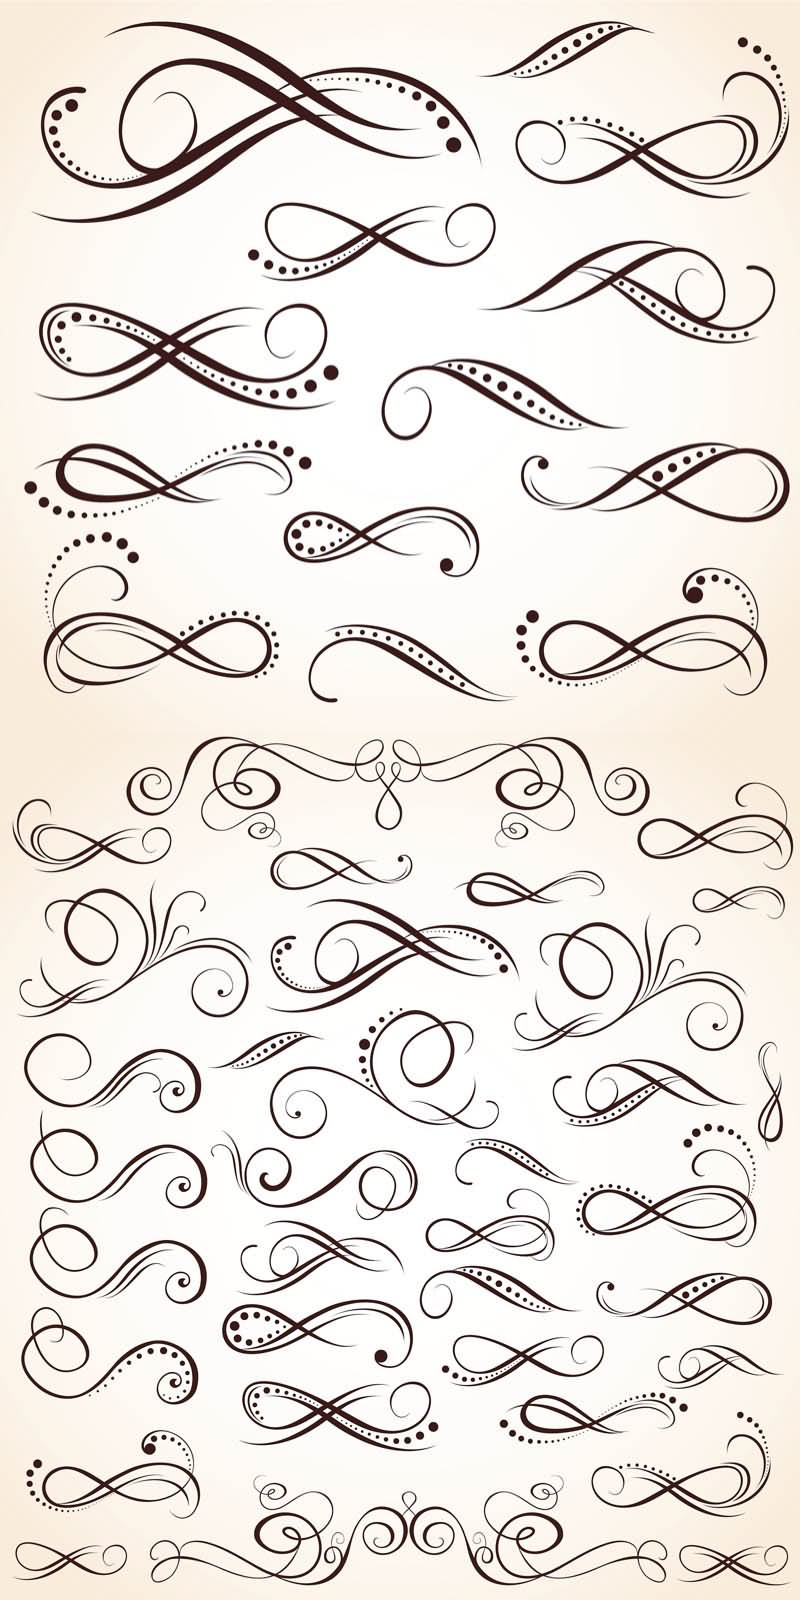 Awesome Infinity Symbol Tattoo Design